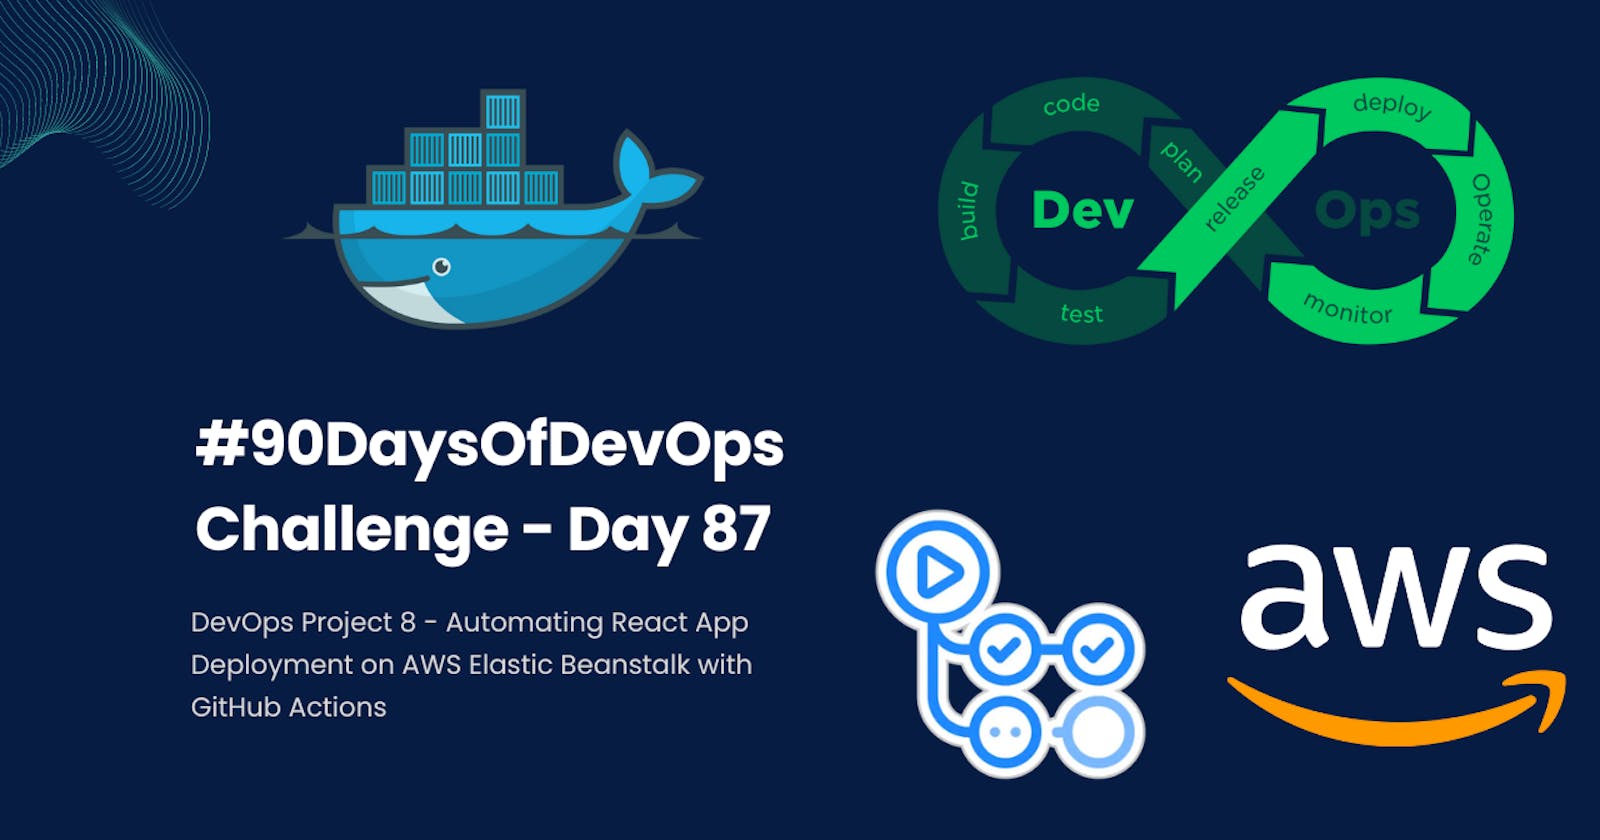 #90DaysOfDevOps Challenge - Day 87 - DevOps Project 8 - Automating React App Deployment on AWS Elastic Beanstalk with GitHub Actions